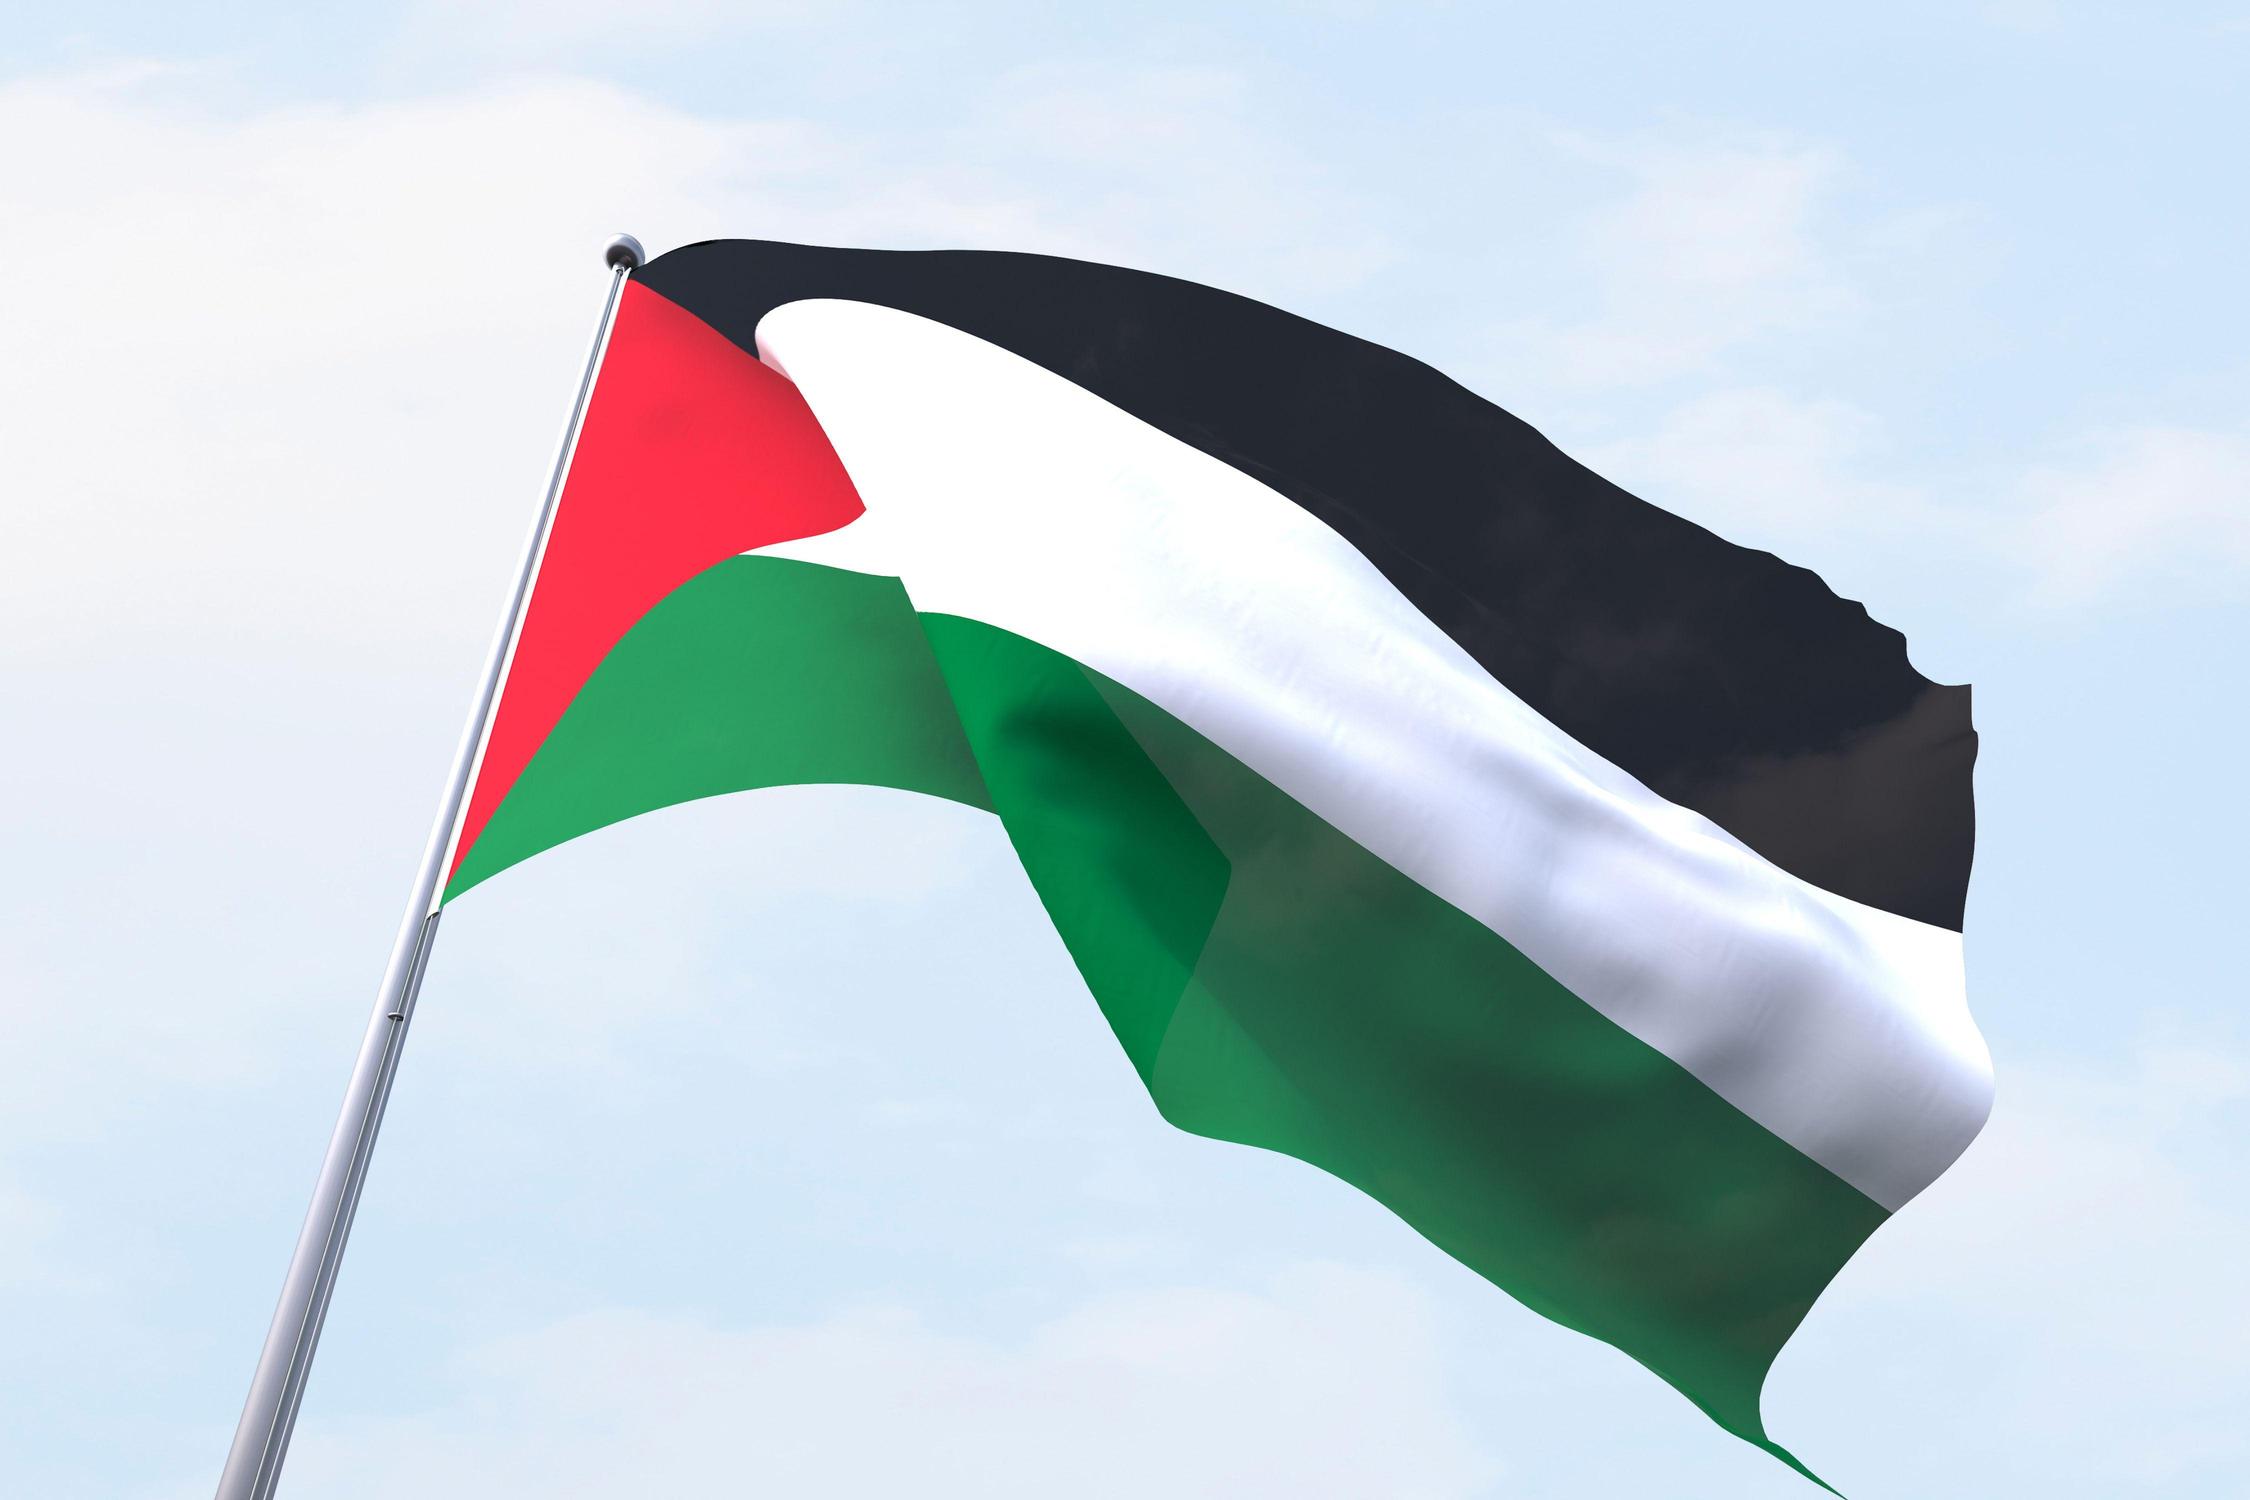 The flag of palestine is waving in the wind against a blue sky .